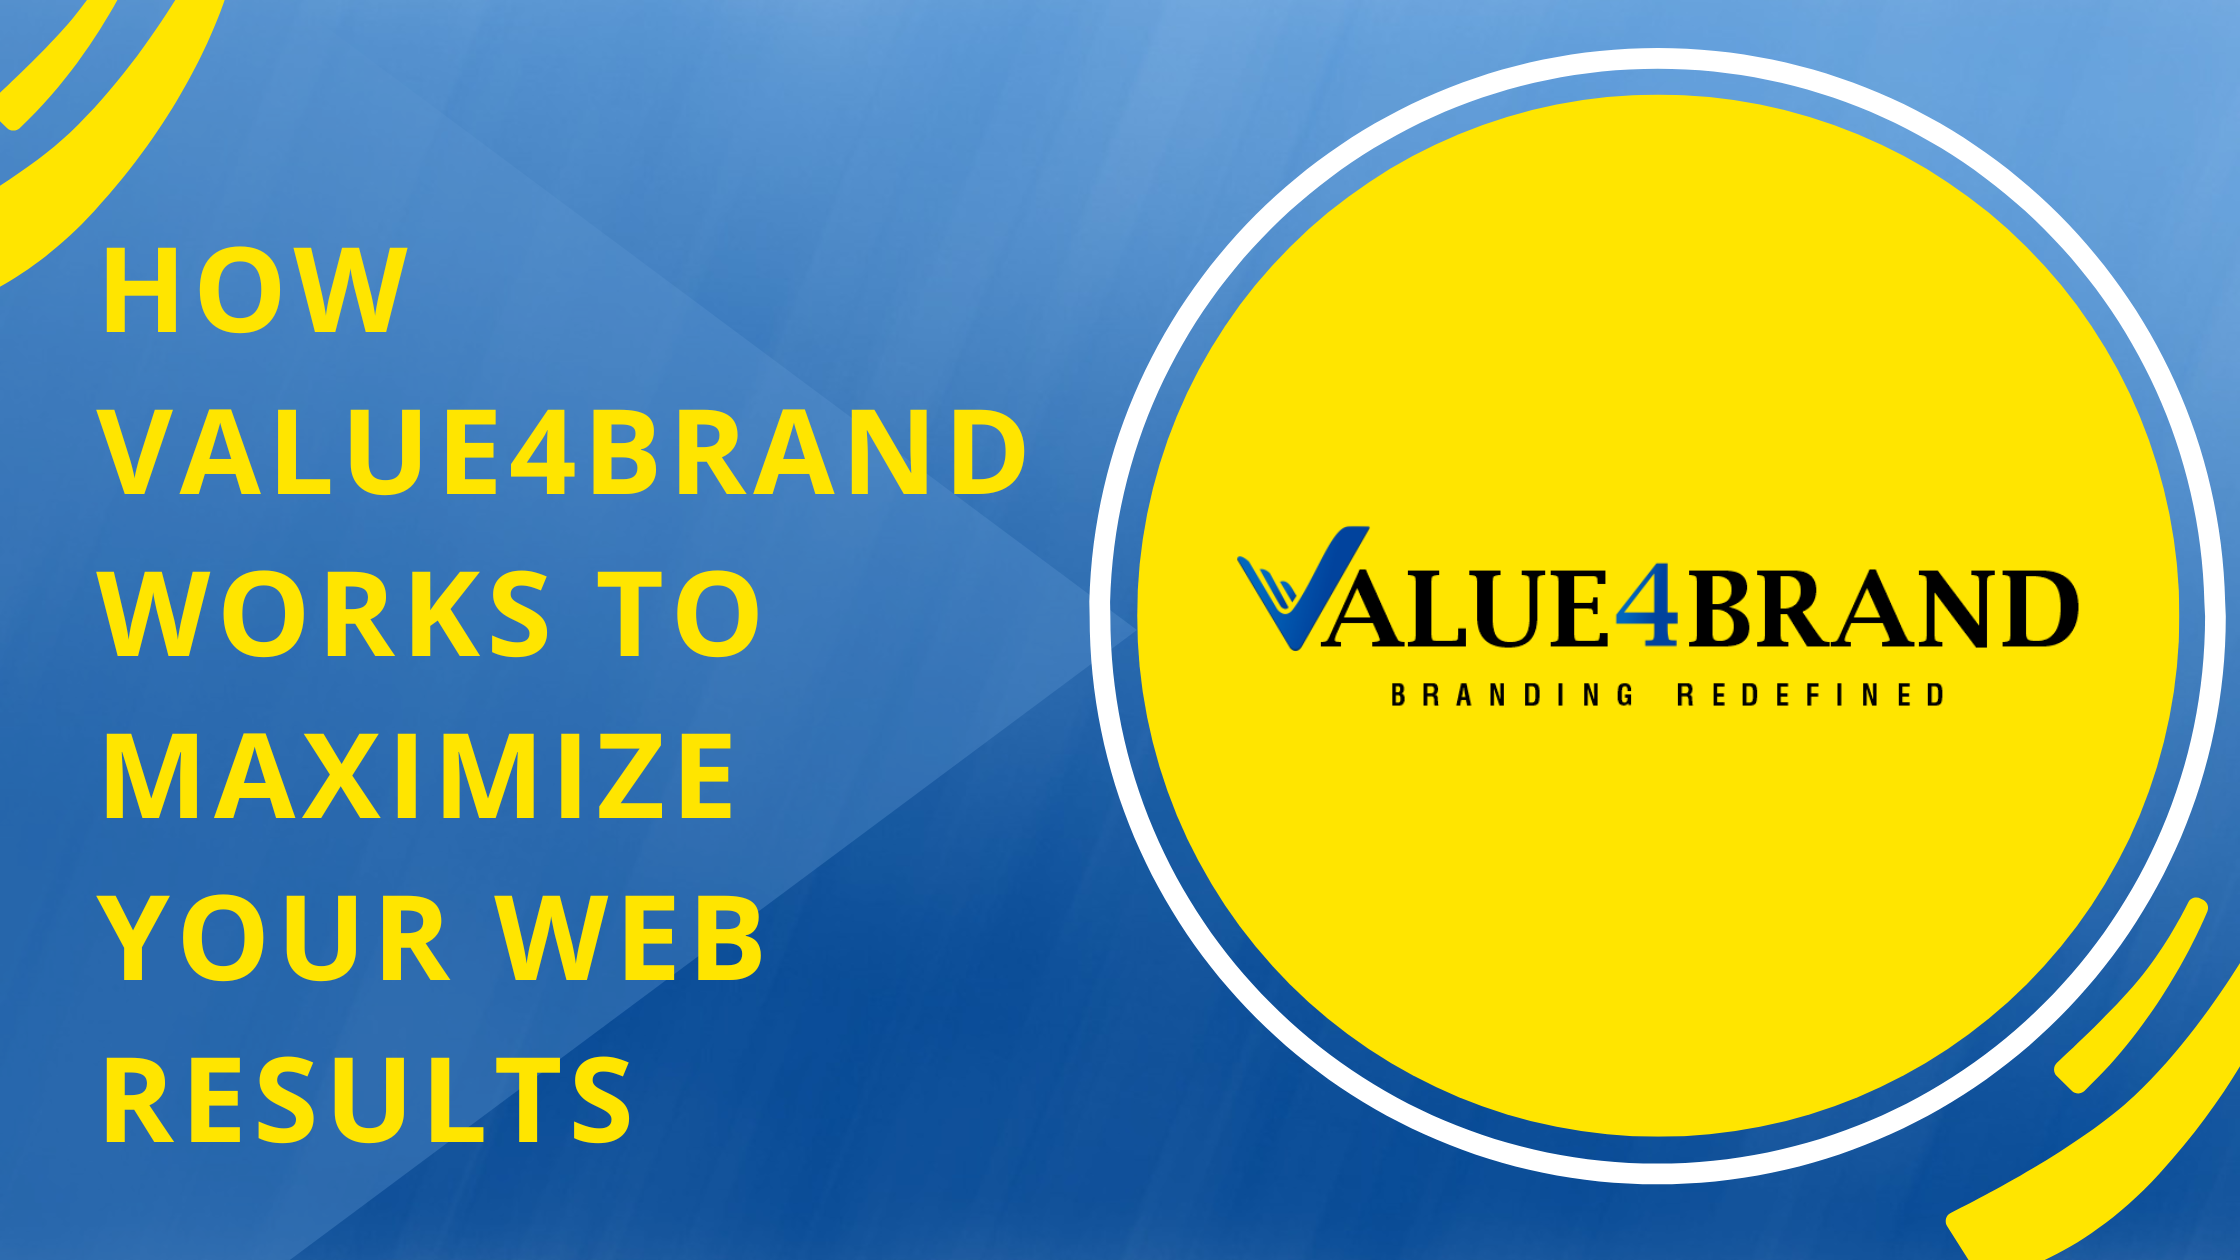 How Value4Brand Works to Maximize Your Web Results